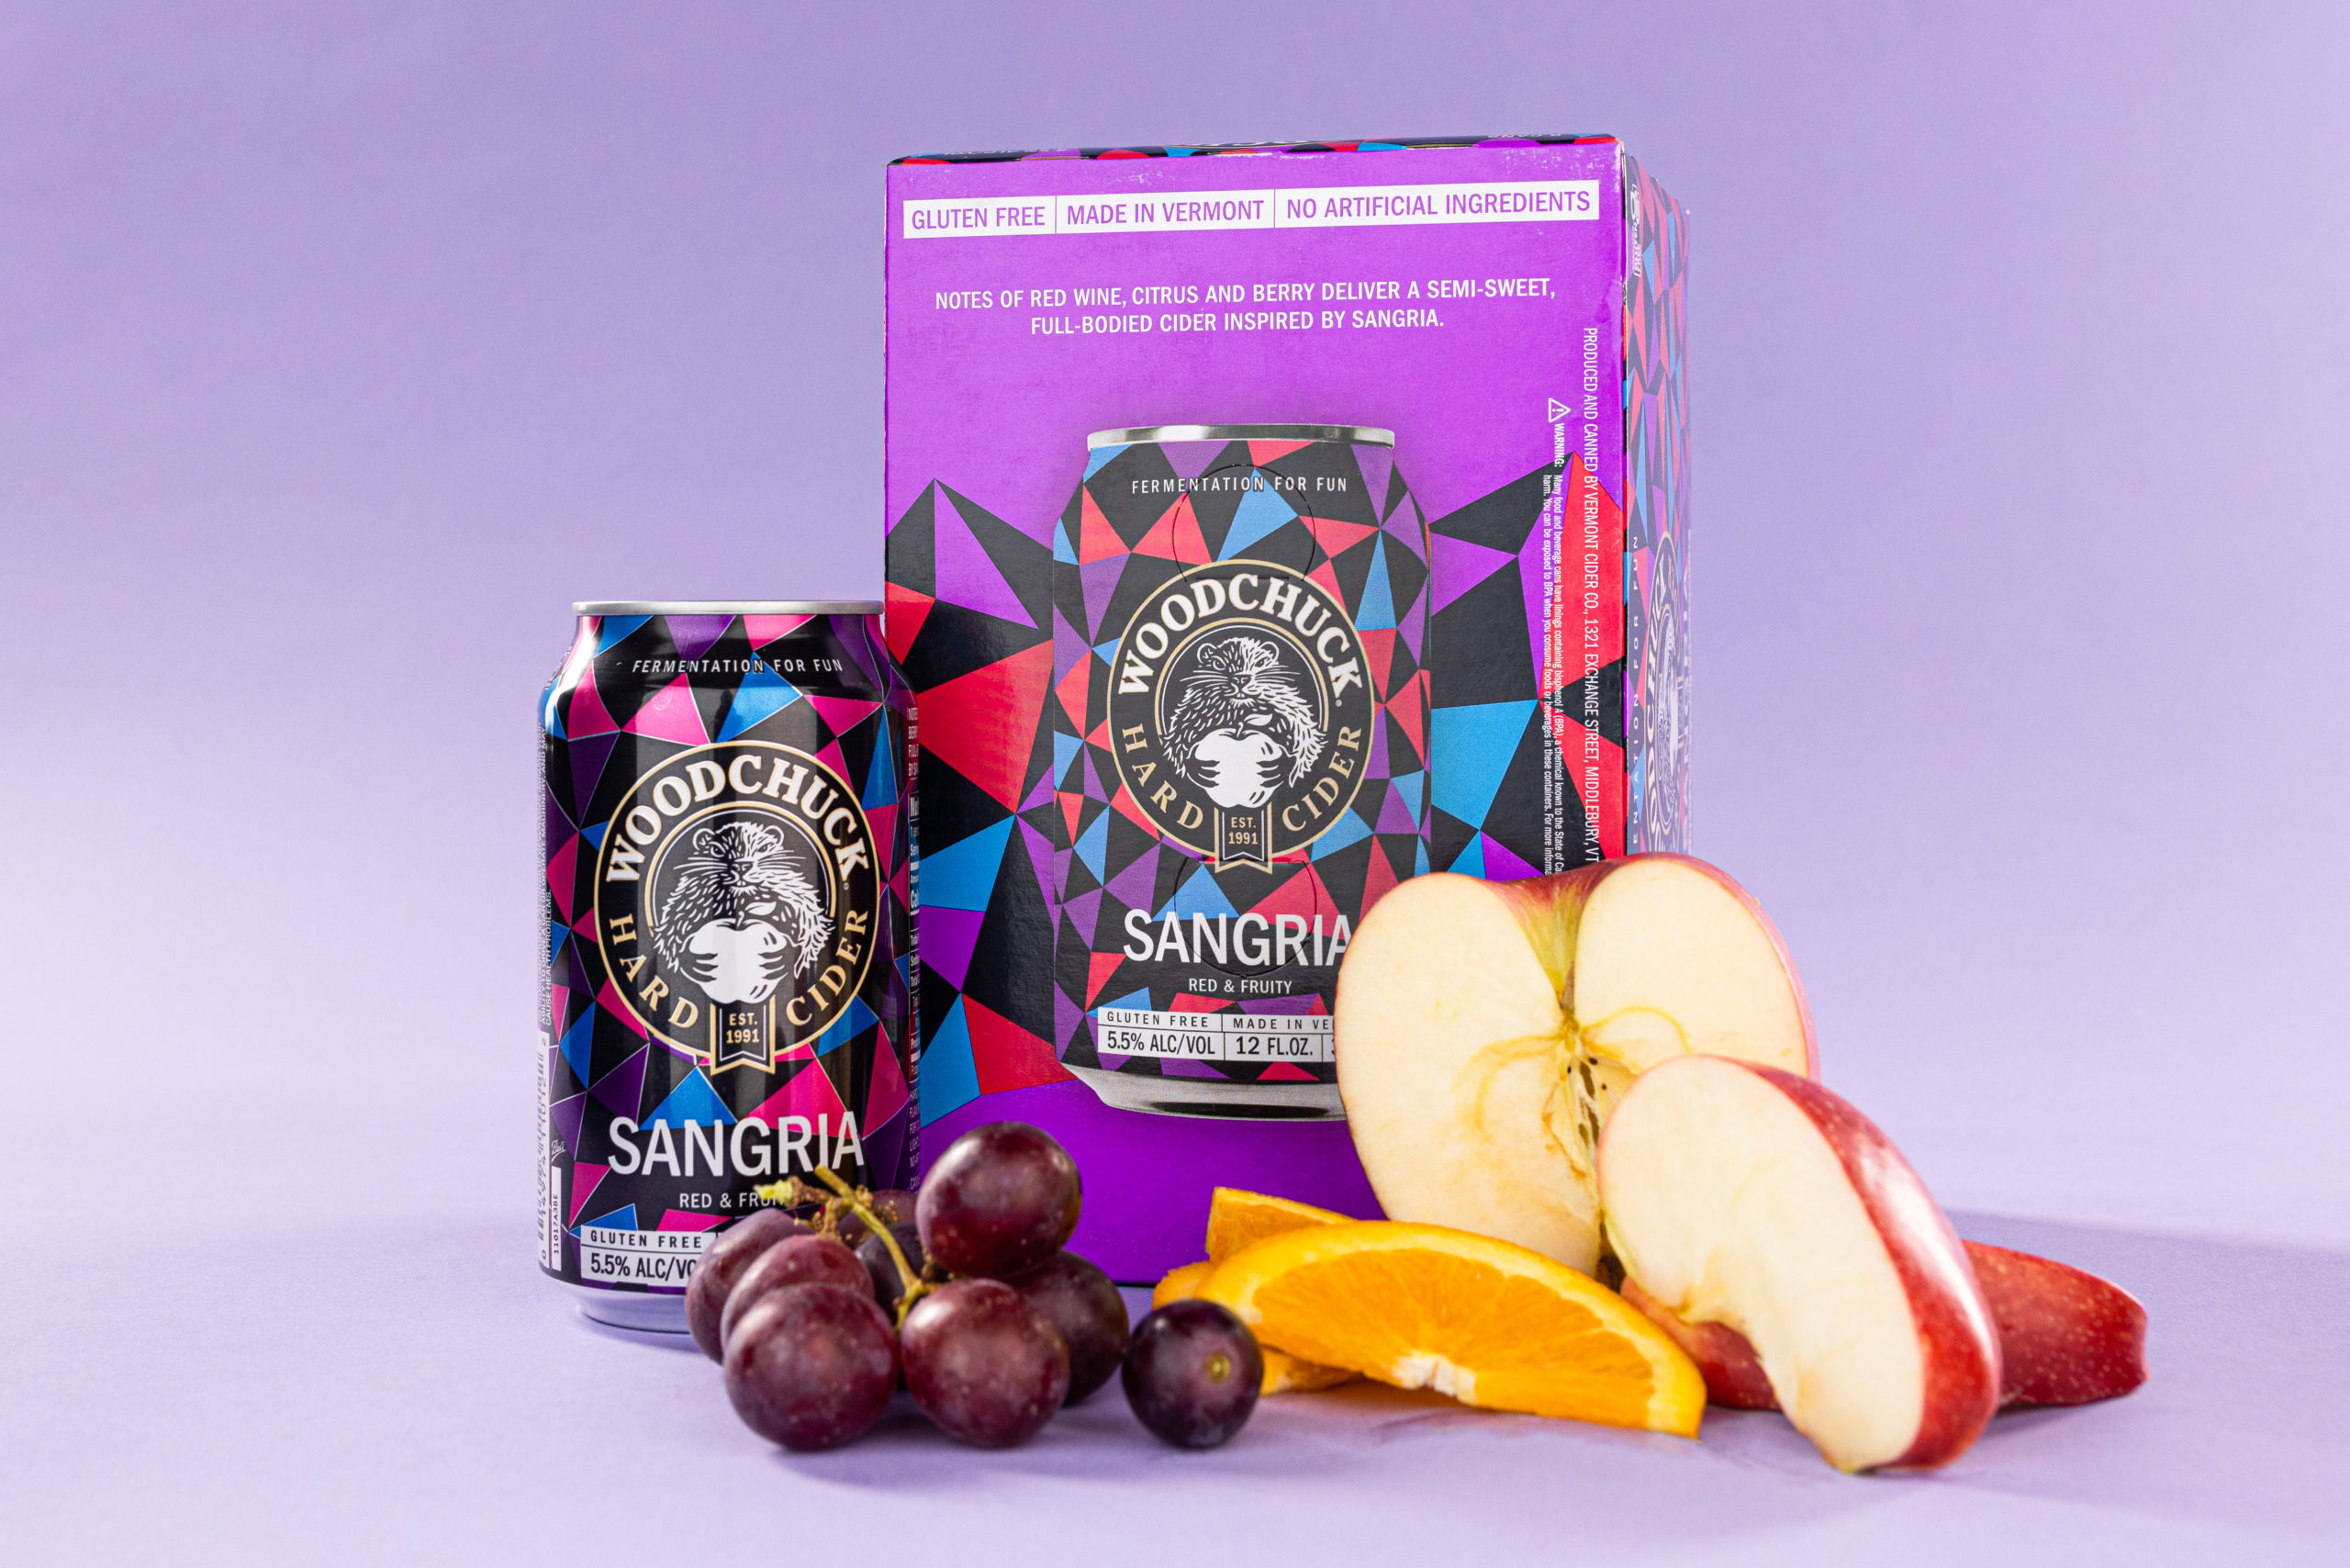 A 12 oz can and a 6 pack of Woodchucks Hard Cider Sangria- red and fruity- with grapes, oranges and apples surrounding the packaging. The 6 pack reads, "Notes of red wine, citrus and berry deliver a semi-sweet, full-bodied cider inspired by sangria"